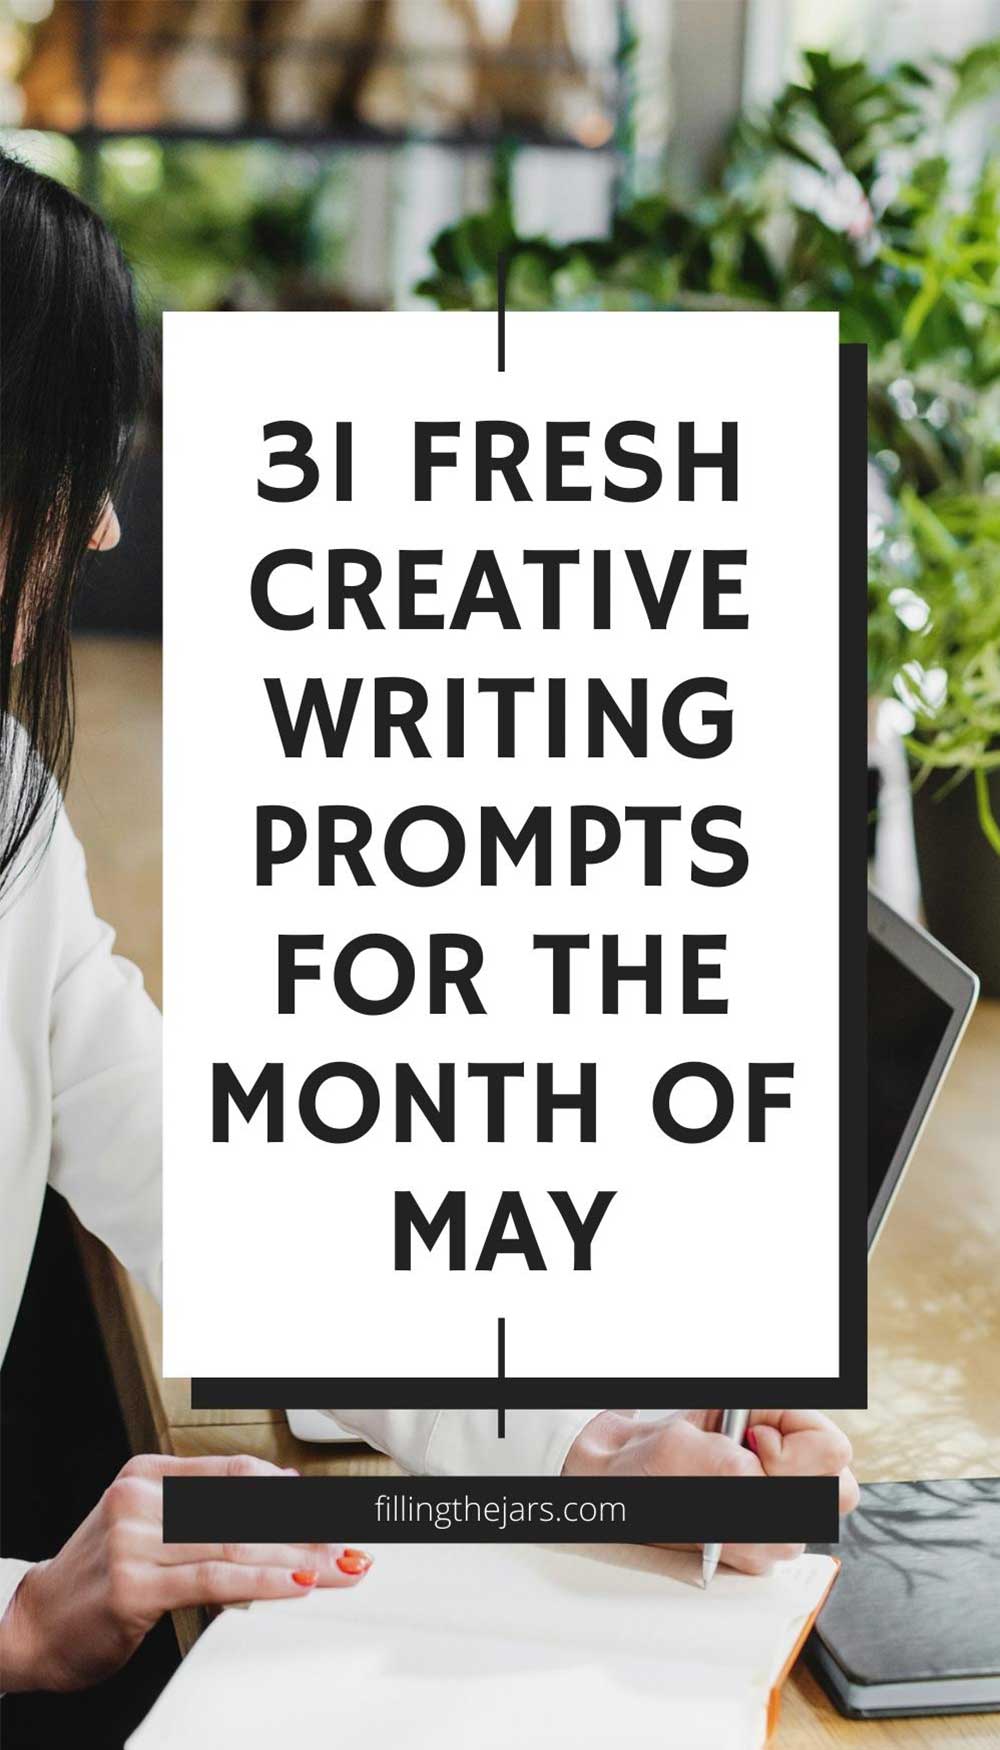 Text 31 fresh creative writing prompts for the month of may on white background over image of woman writing in journal at a table surrounded by green plants.